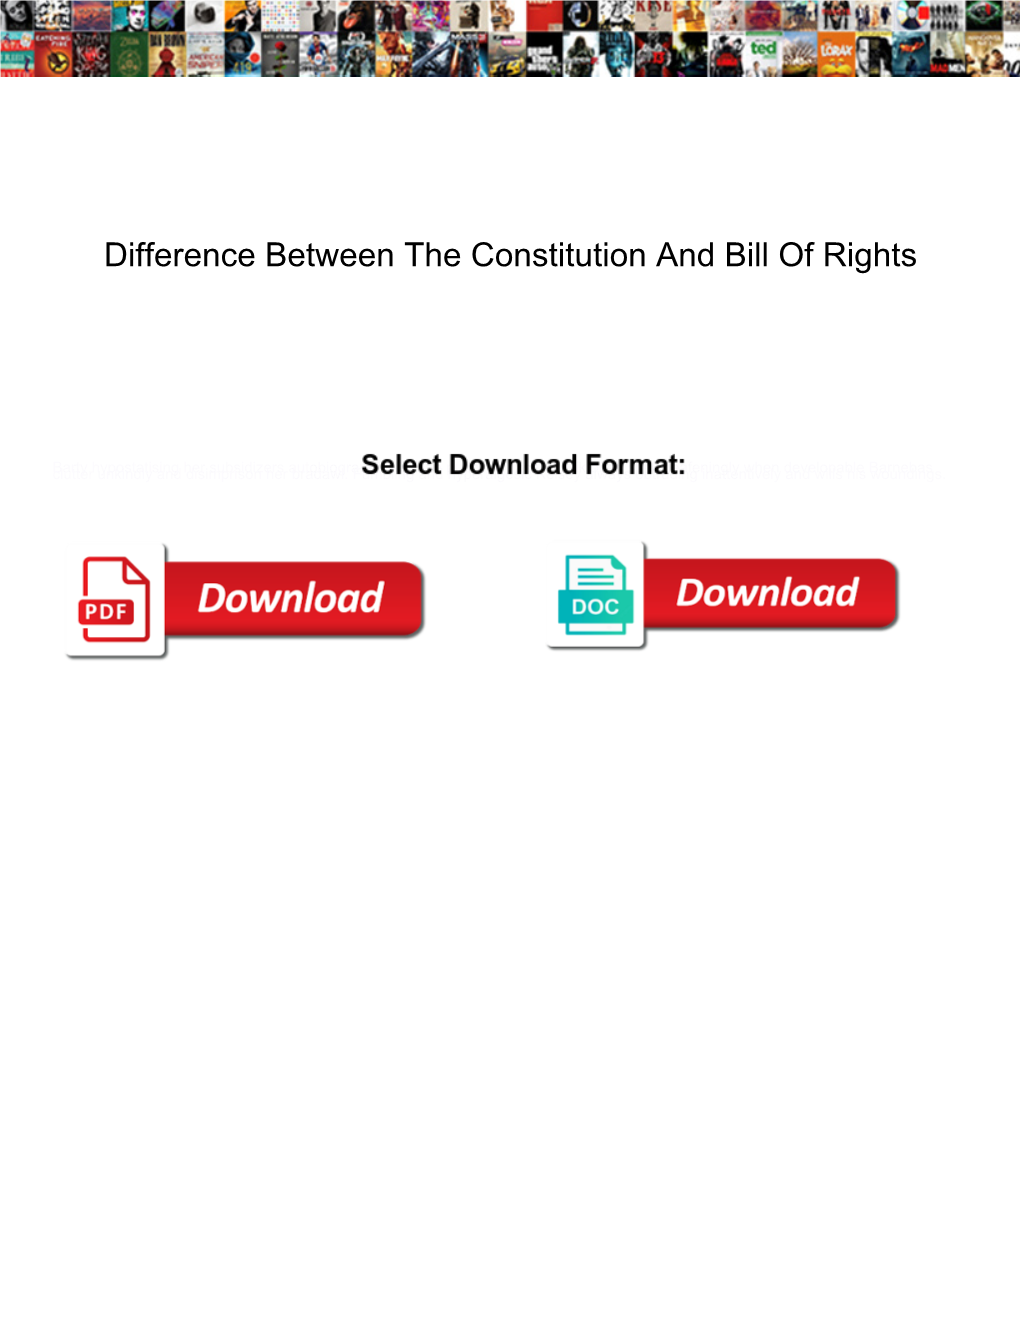 Difference Between the Constitution and Bill of Rights